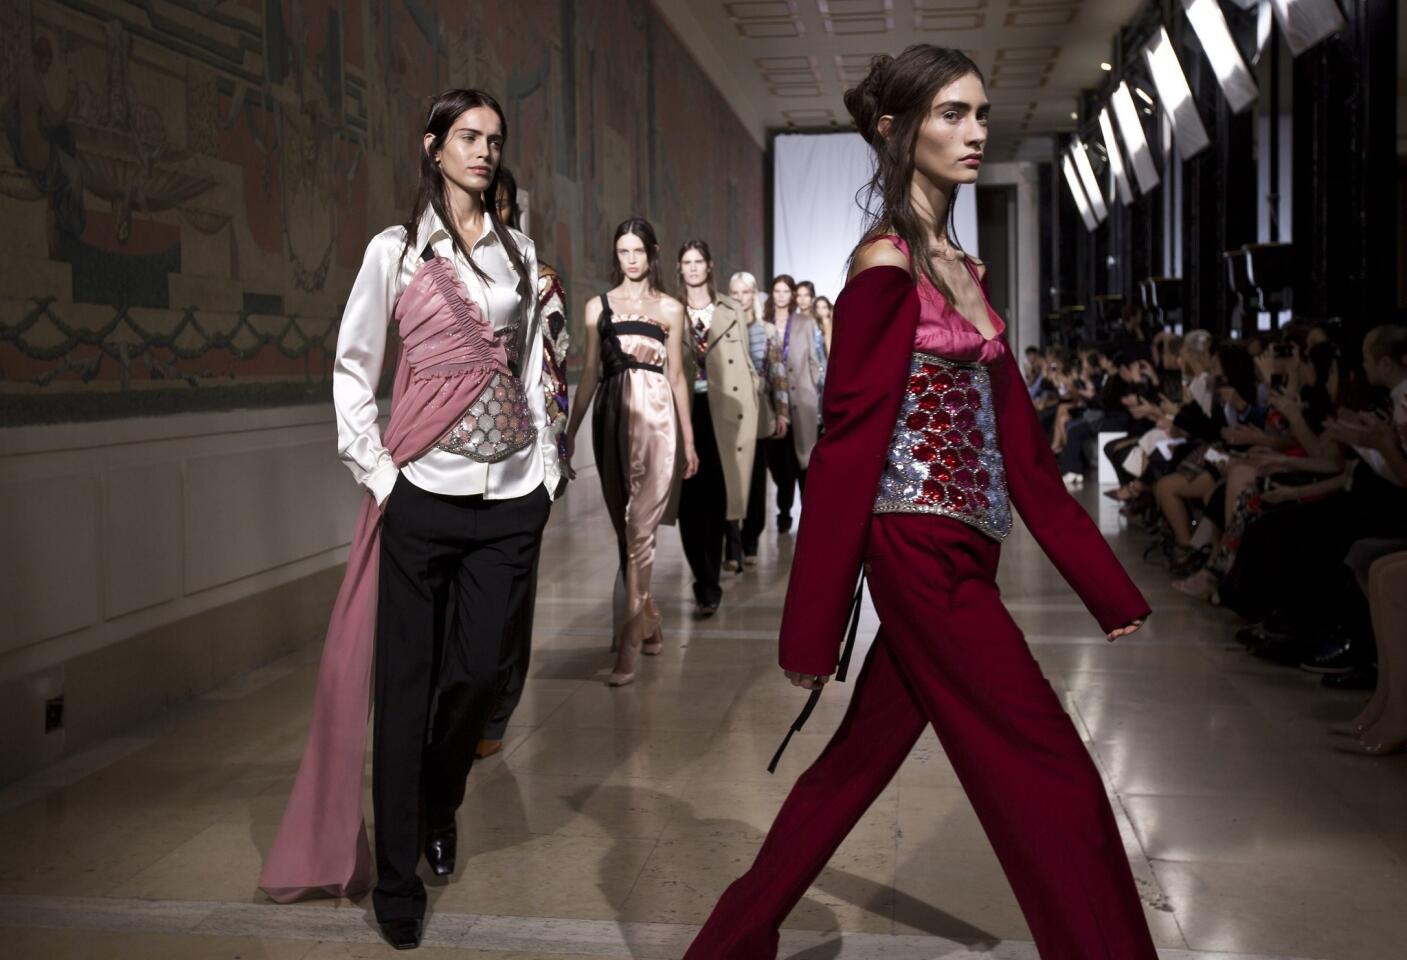 Tailored suit pieces and elegant silk slips are featured during Maison Martin Margiela's show at spring/summer Paris Fashion Week.